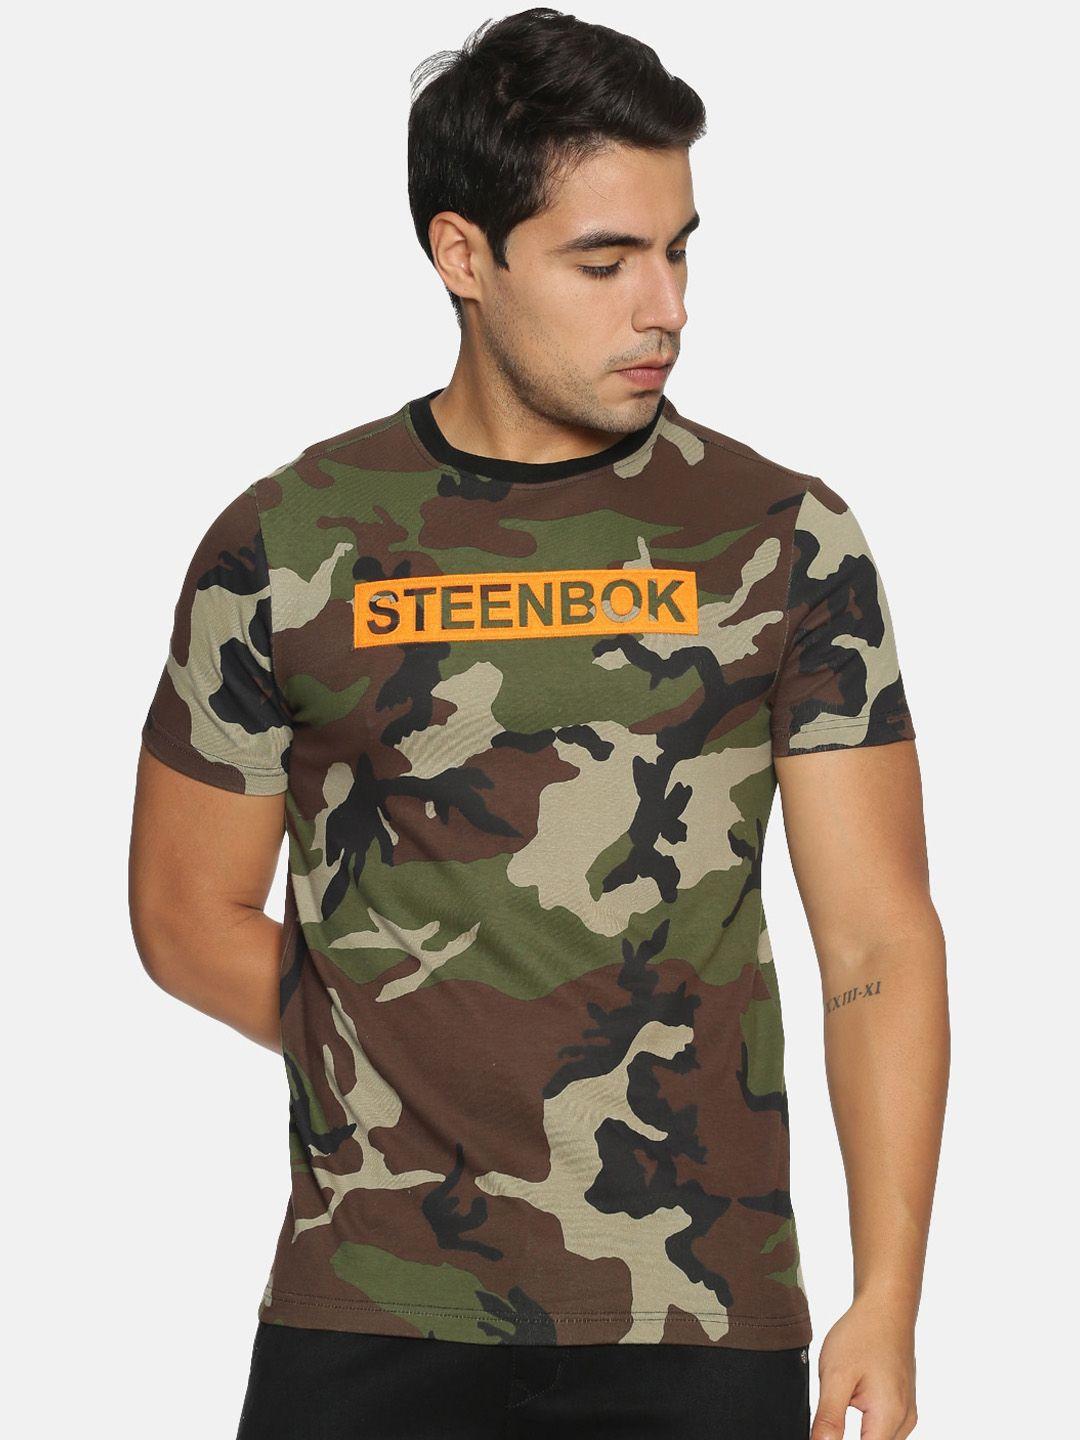 steenbok men olive green camouflage printed round neck pure cotton t-shirt